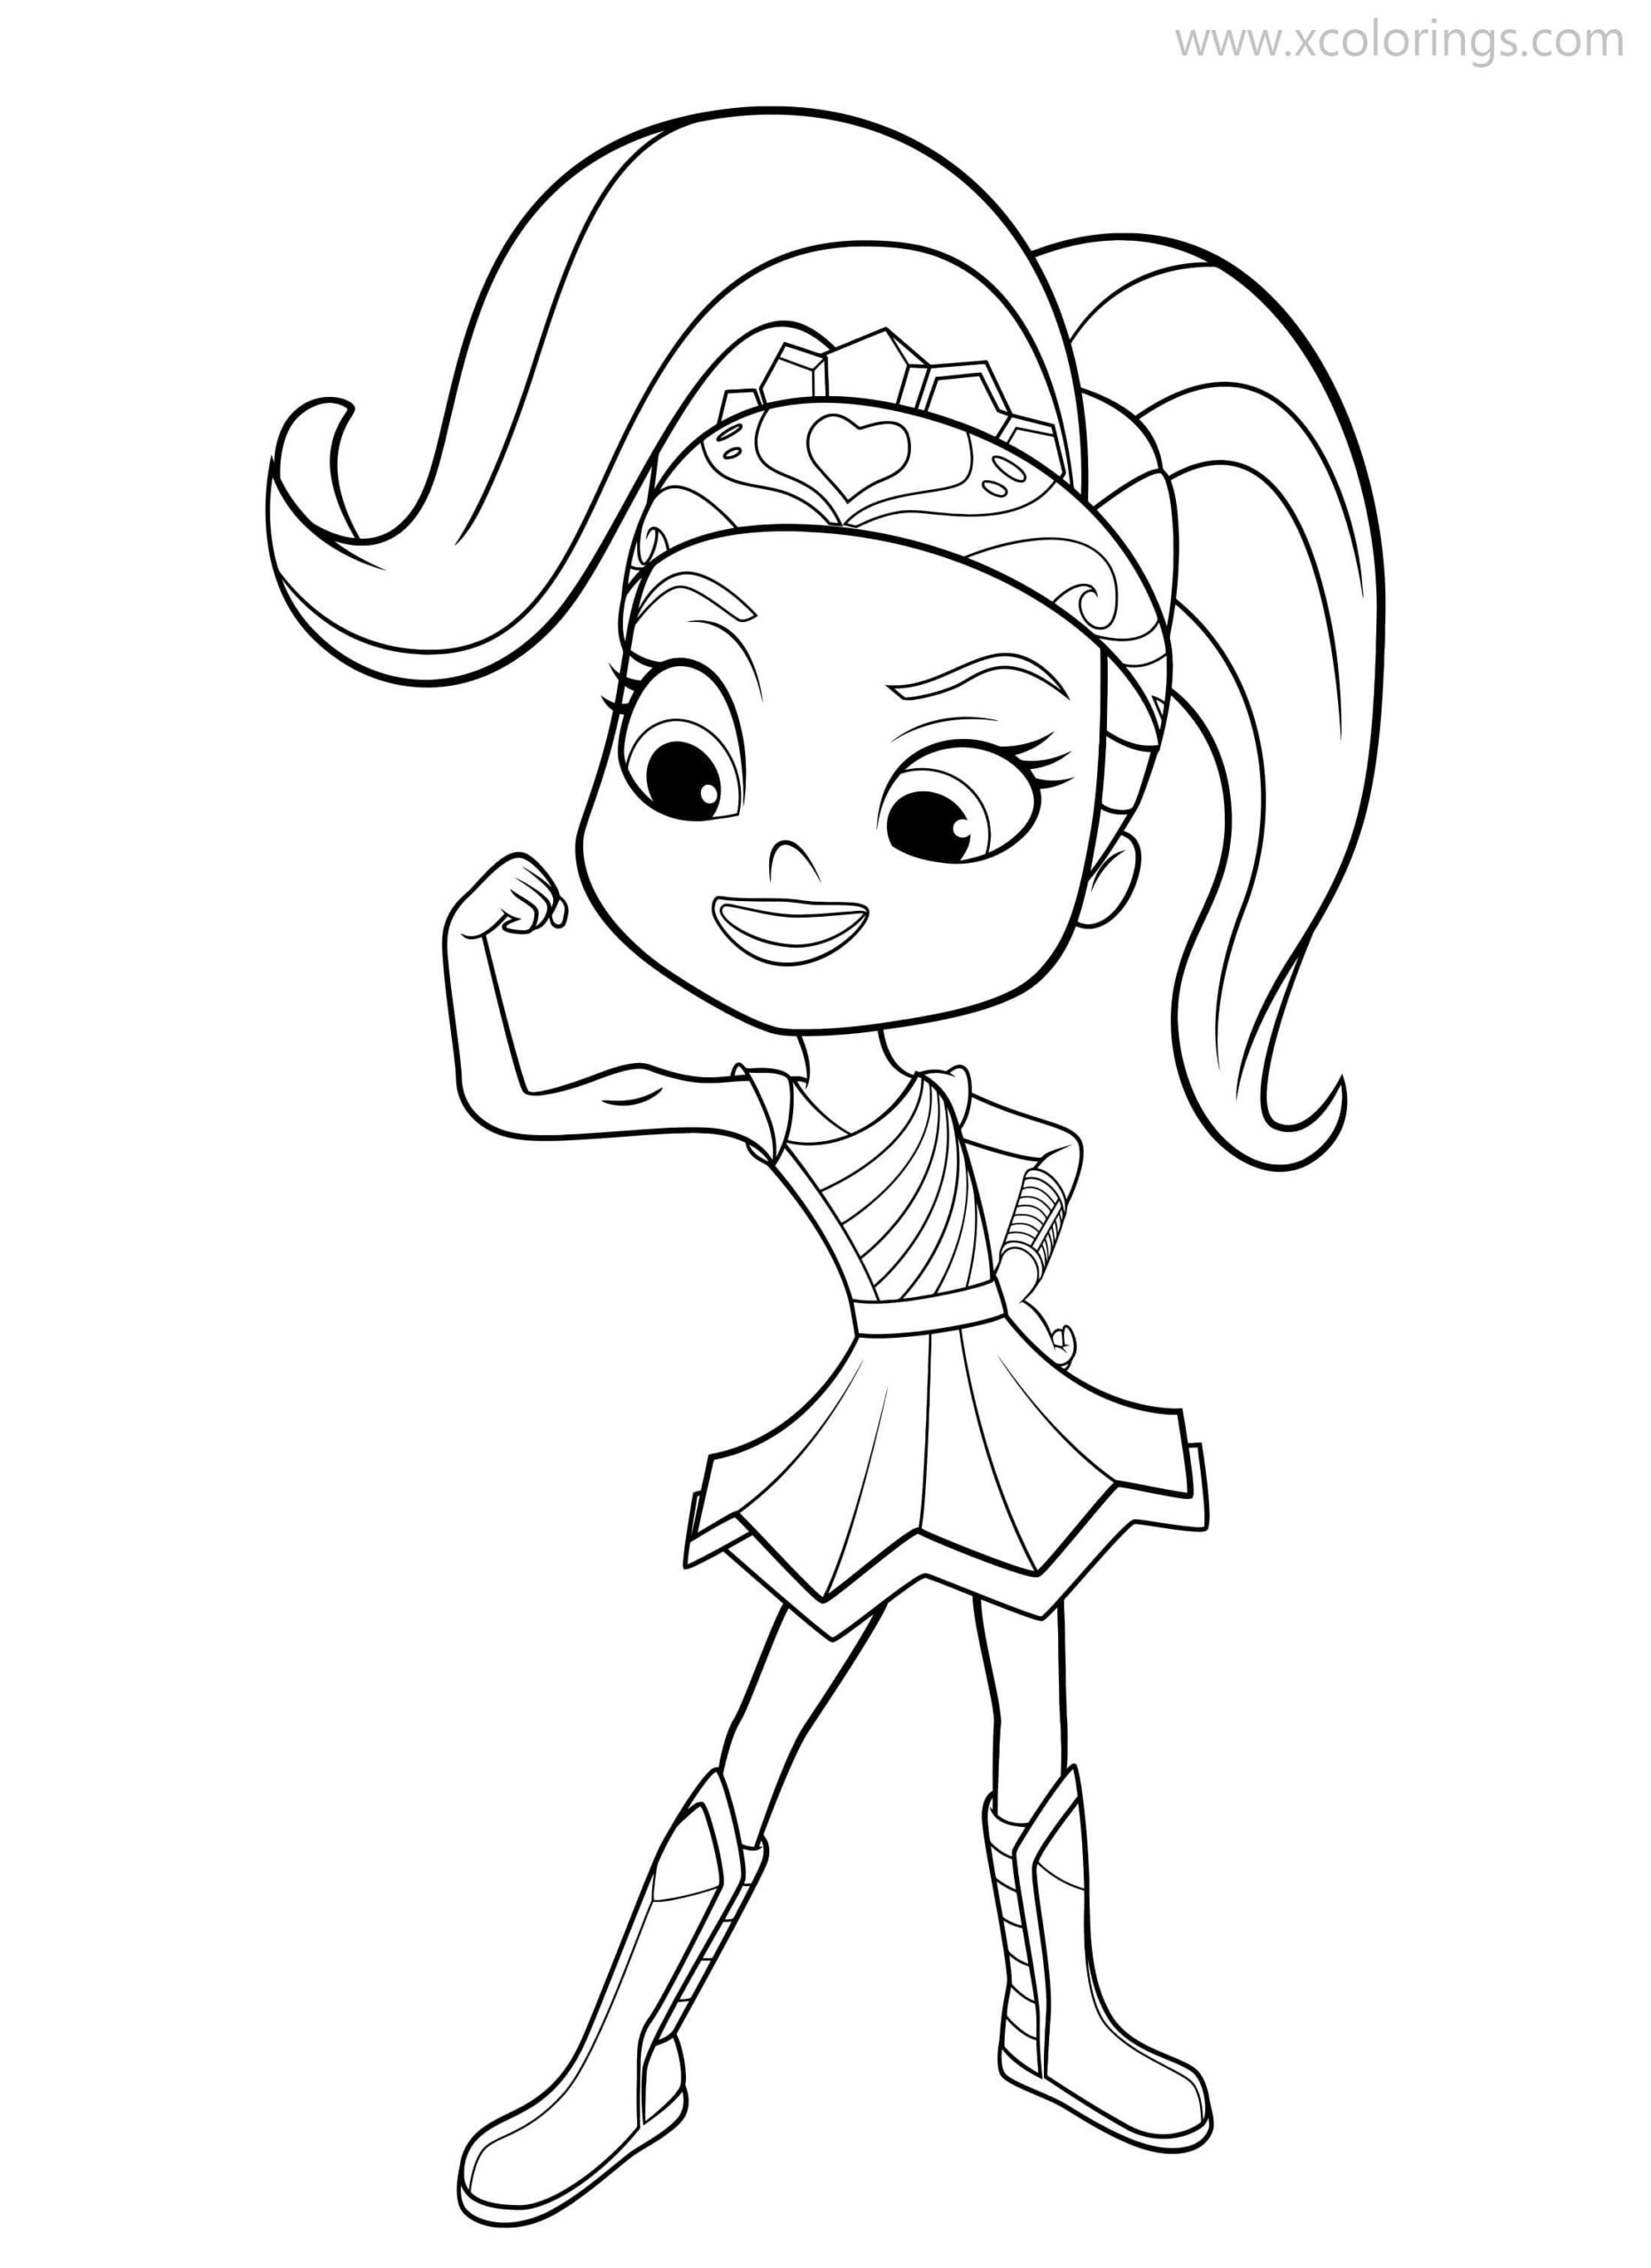 Rainbow Rangers Coloring Pages Rosie Redd - XColorings.com